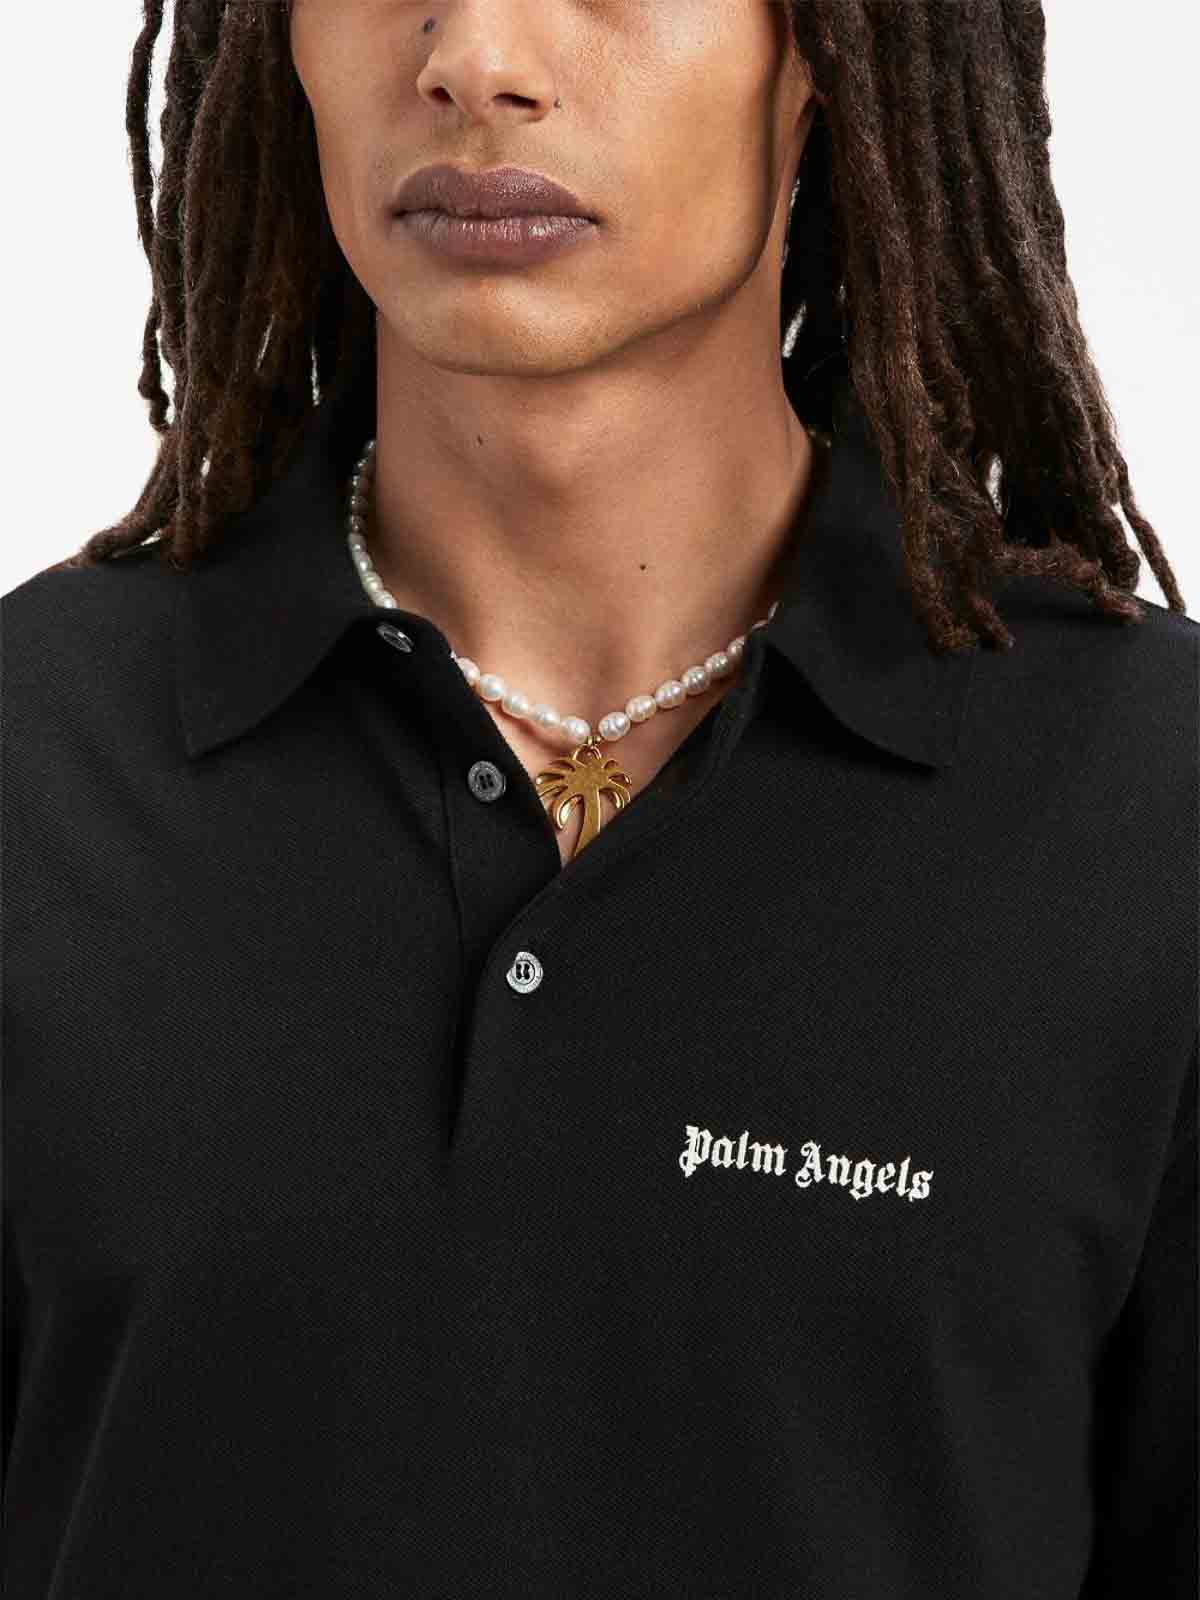 Shop Palm Angels Polo - Negro In Black